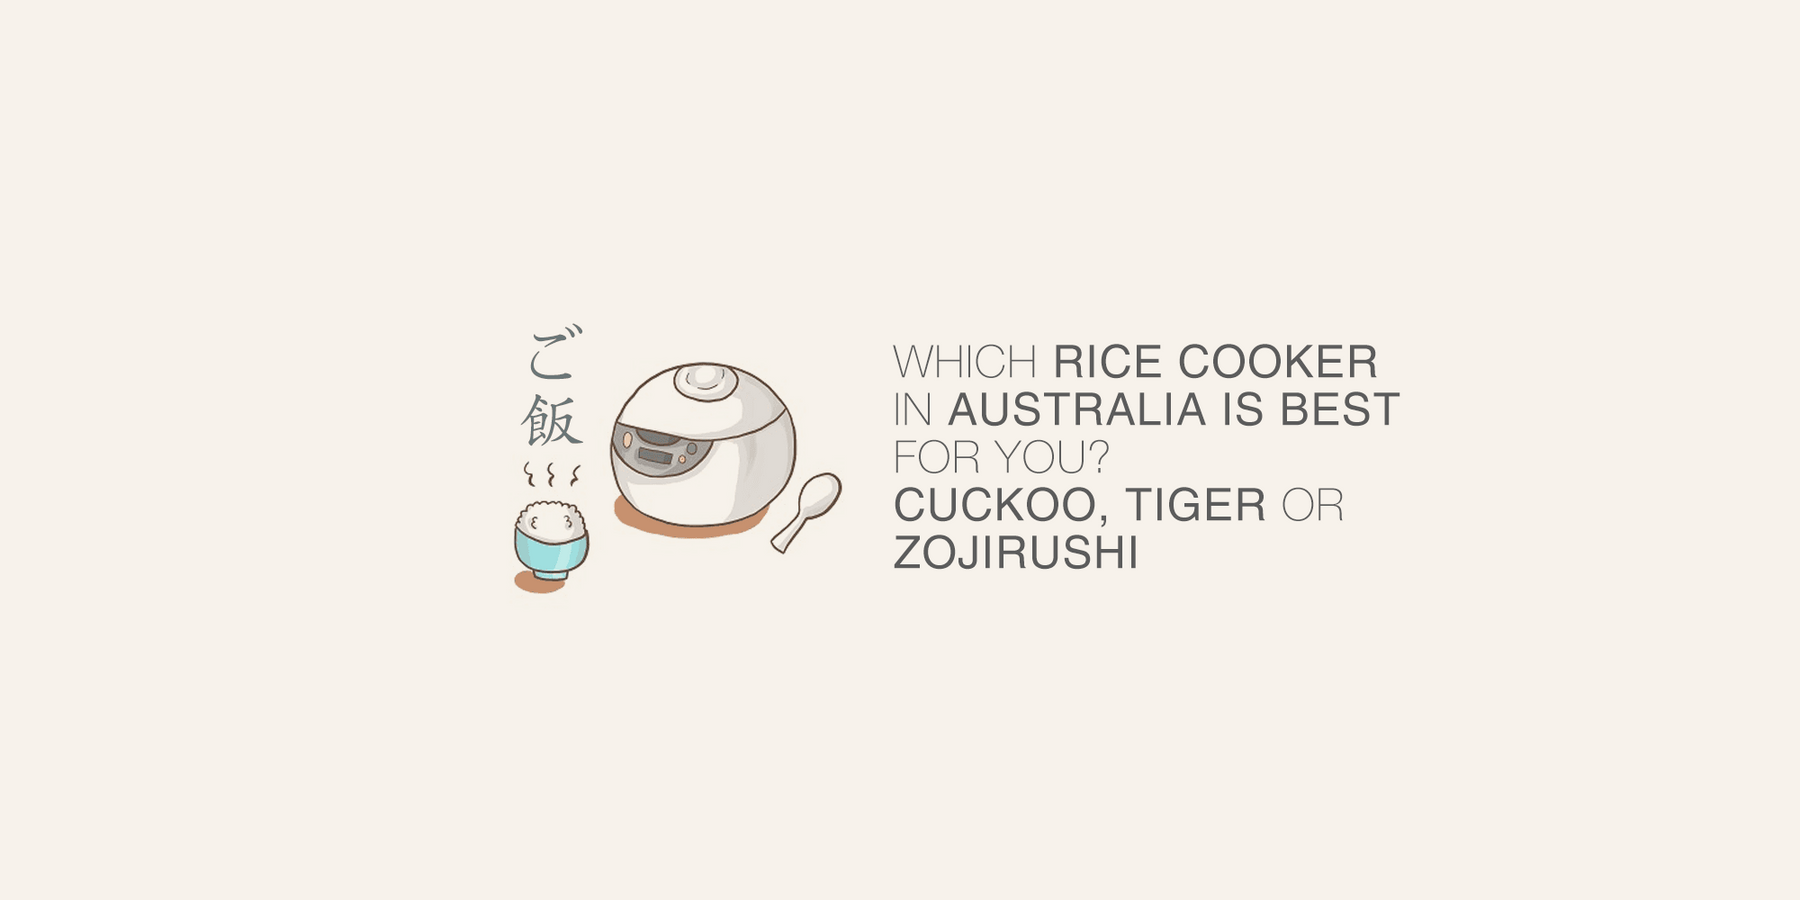 Which is the best rice cooker in Australia for you? Cuckoo or Tiger?